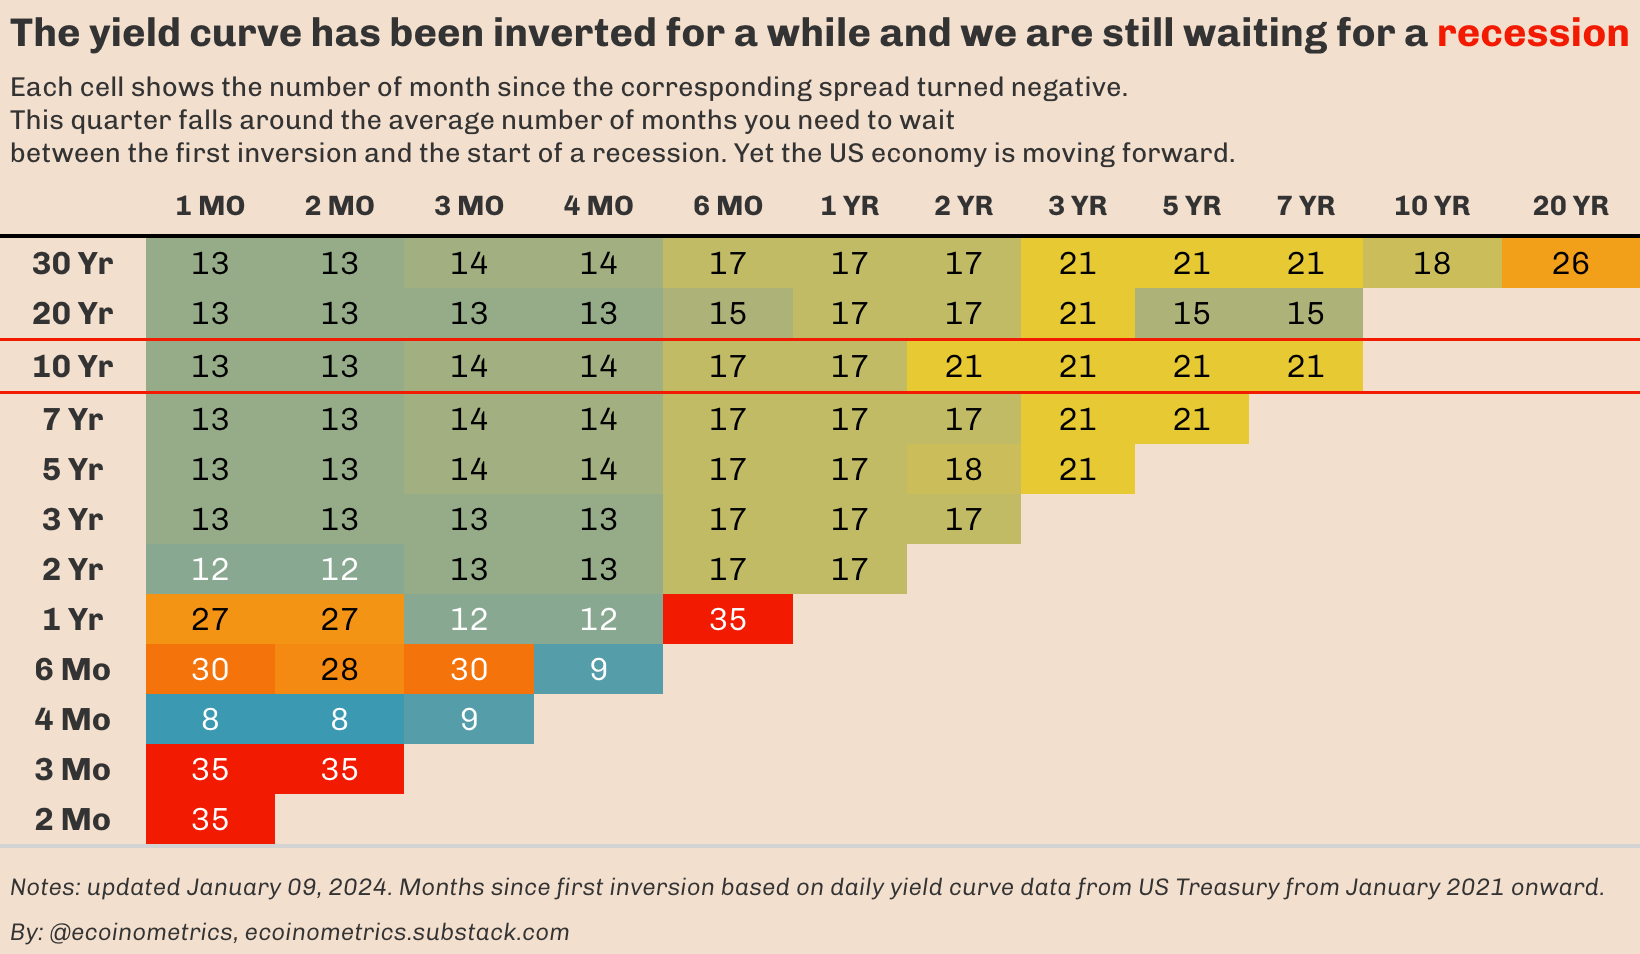 The yield curve has been inverted for more than a year: the risk of a recession is high in the US